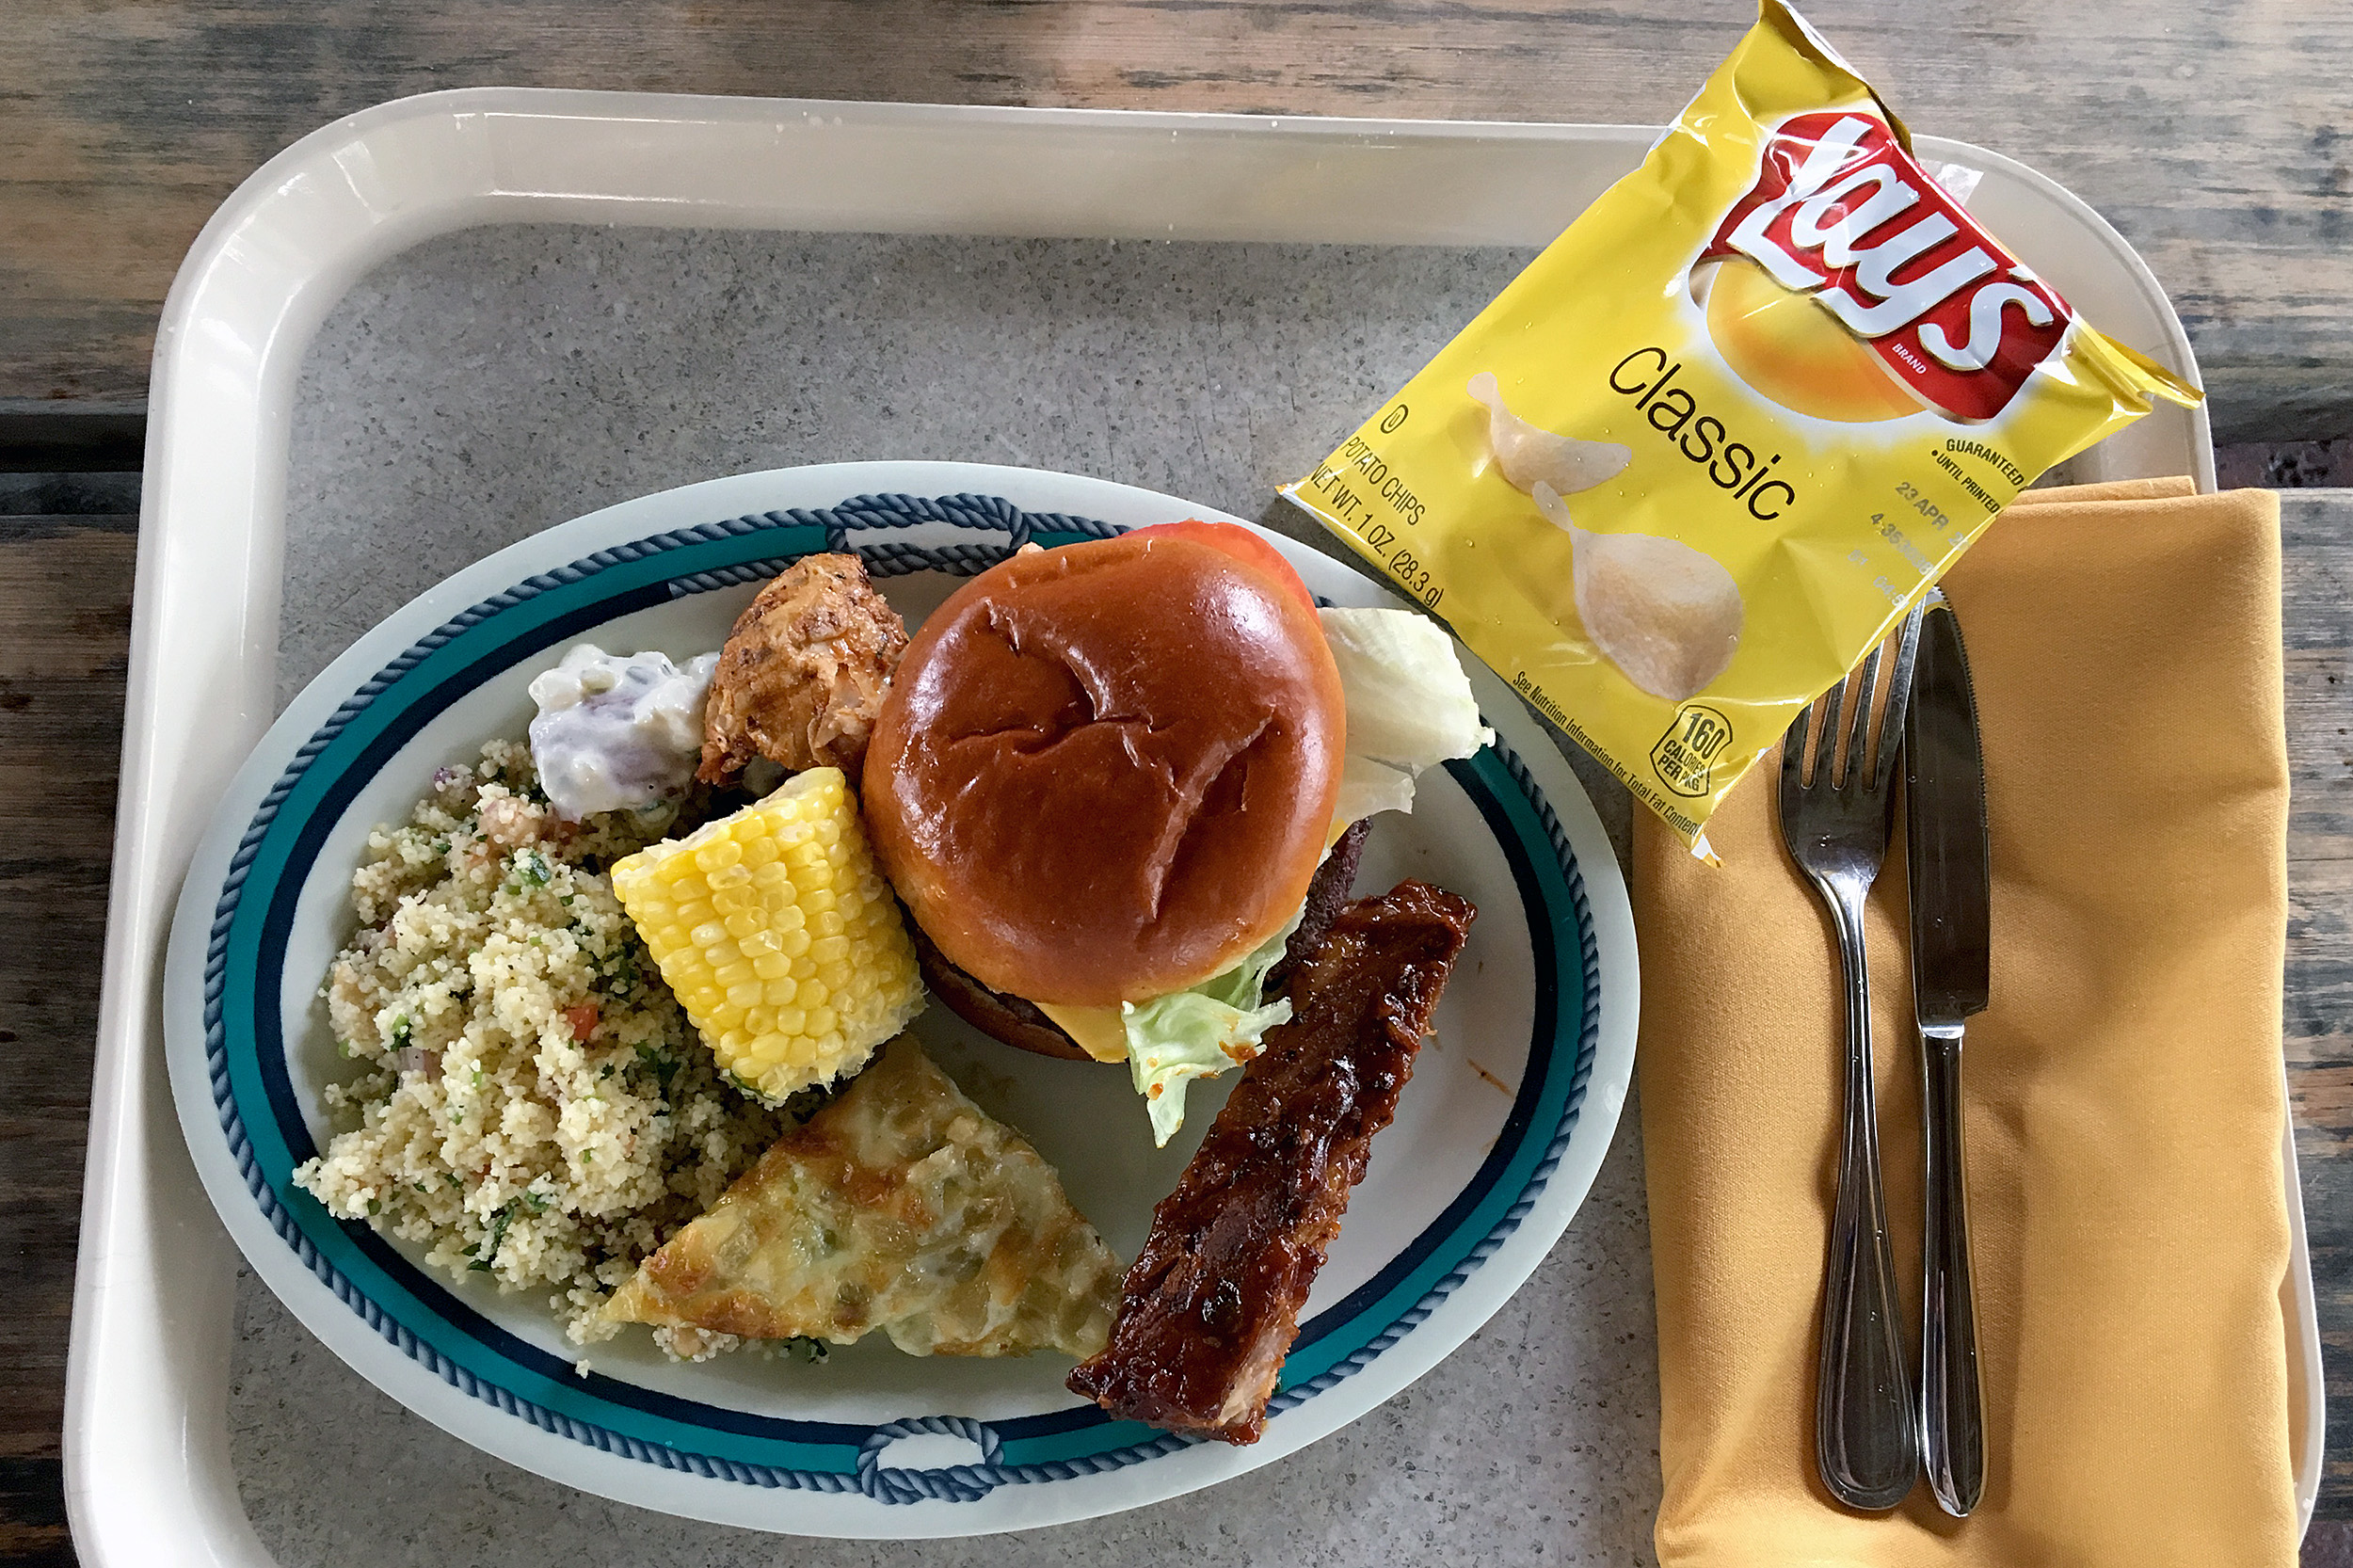 Castaway Cay Lunch Cookies BBQ